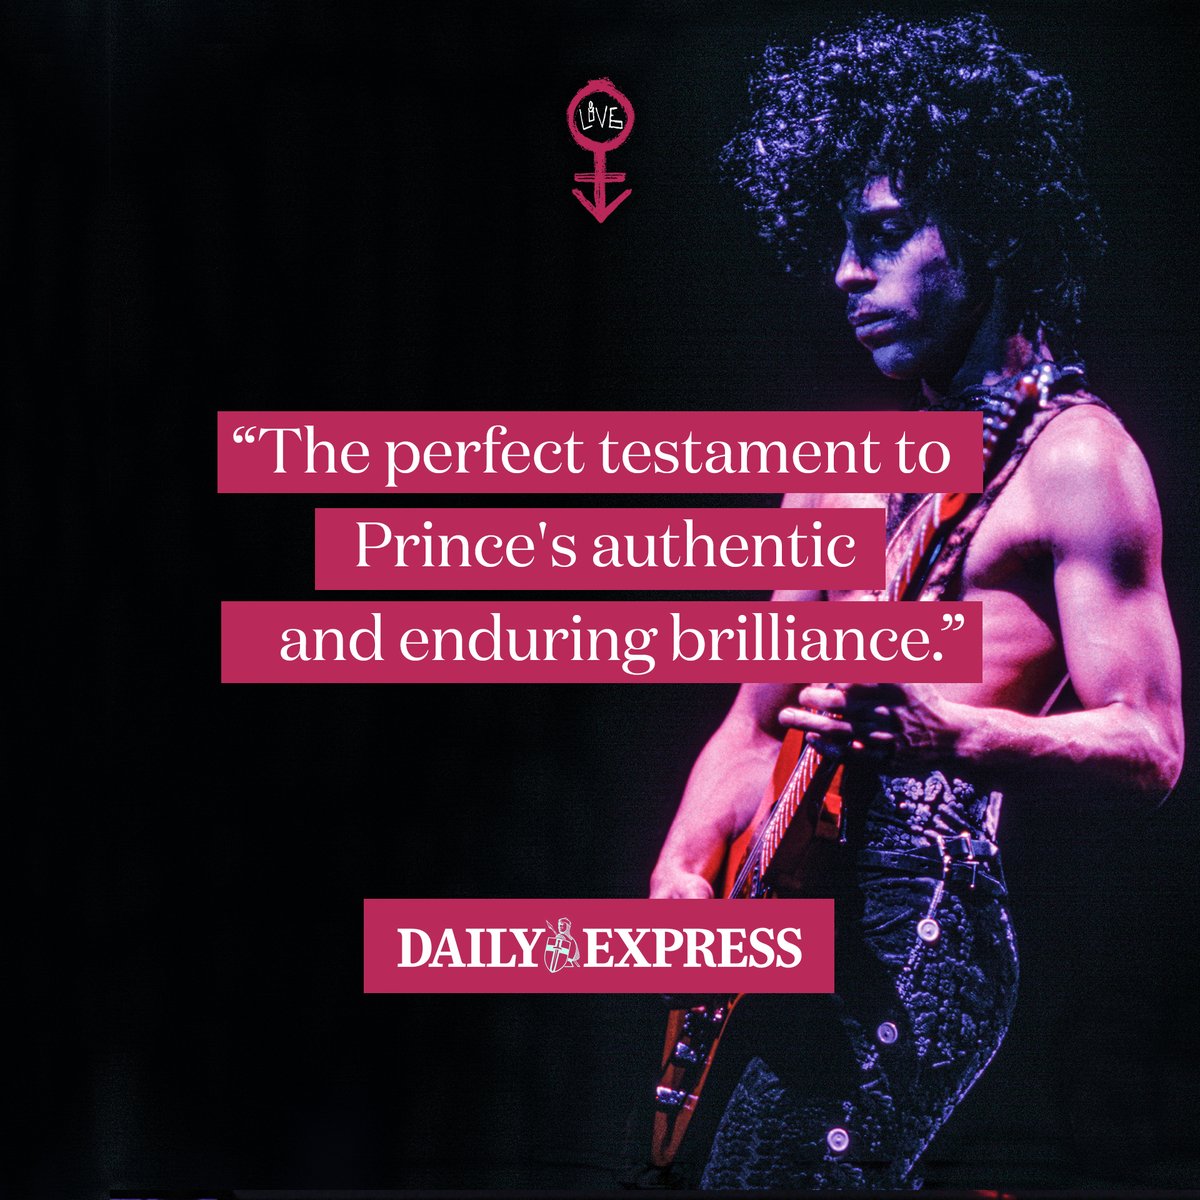 The reviews are in, and critics at the @StarTribune, @Daily_Express, @TheSun, and @syracusedotcom agree: the newly remixed and remastered Prince and @TheRevolution: Live is 'The perfect testament to Prince's authentic and enduring brilliance' and simply 'astonishing.'